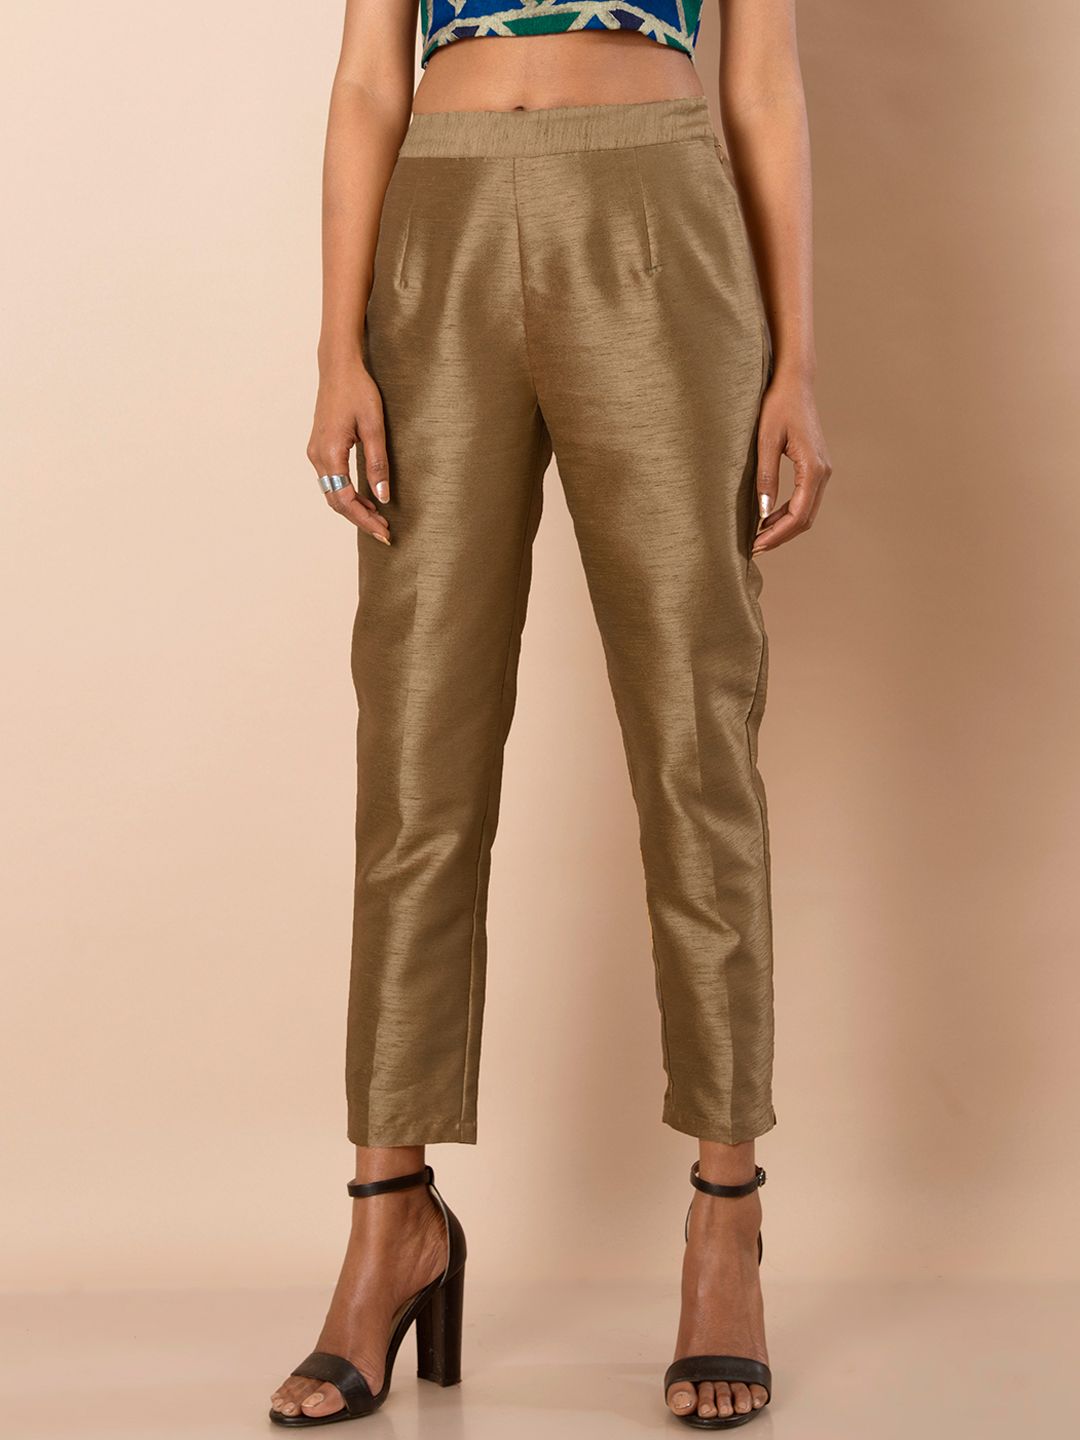 INDYA Gold-Toned Silk Cigarette Trousers Price in India